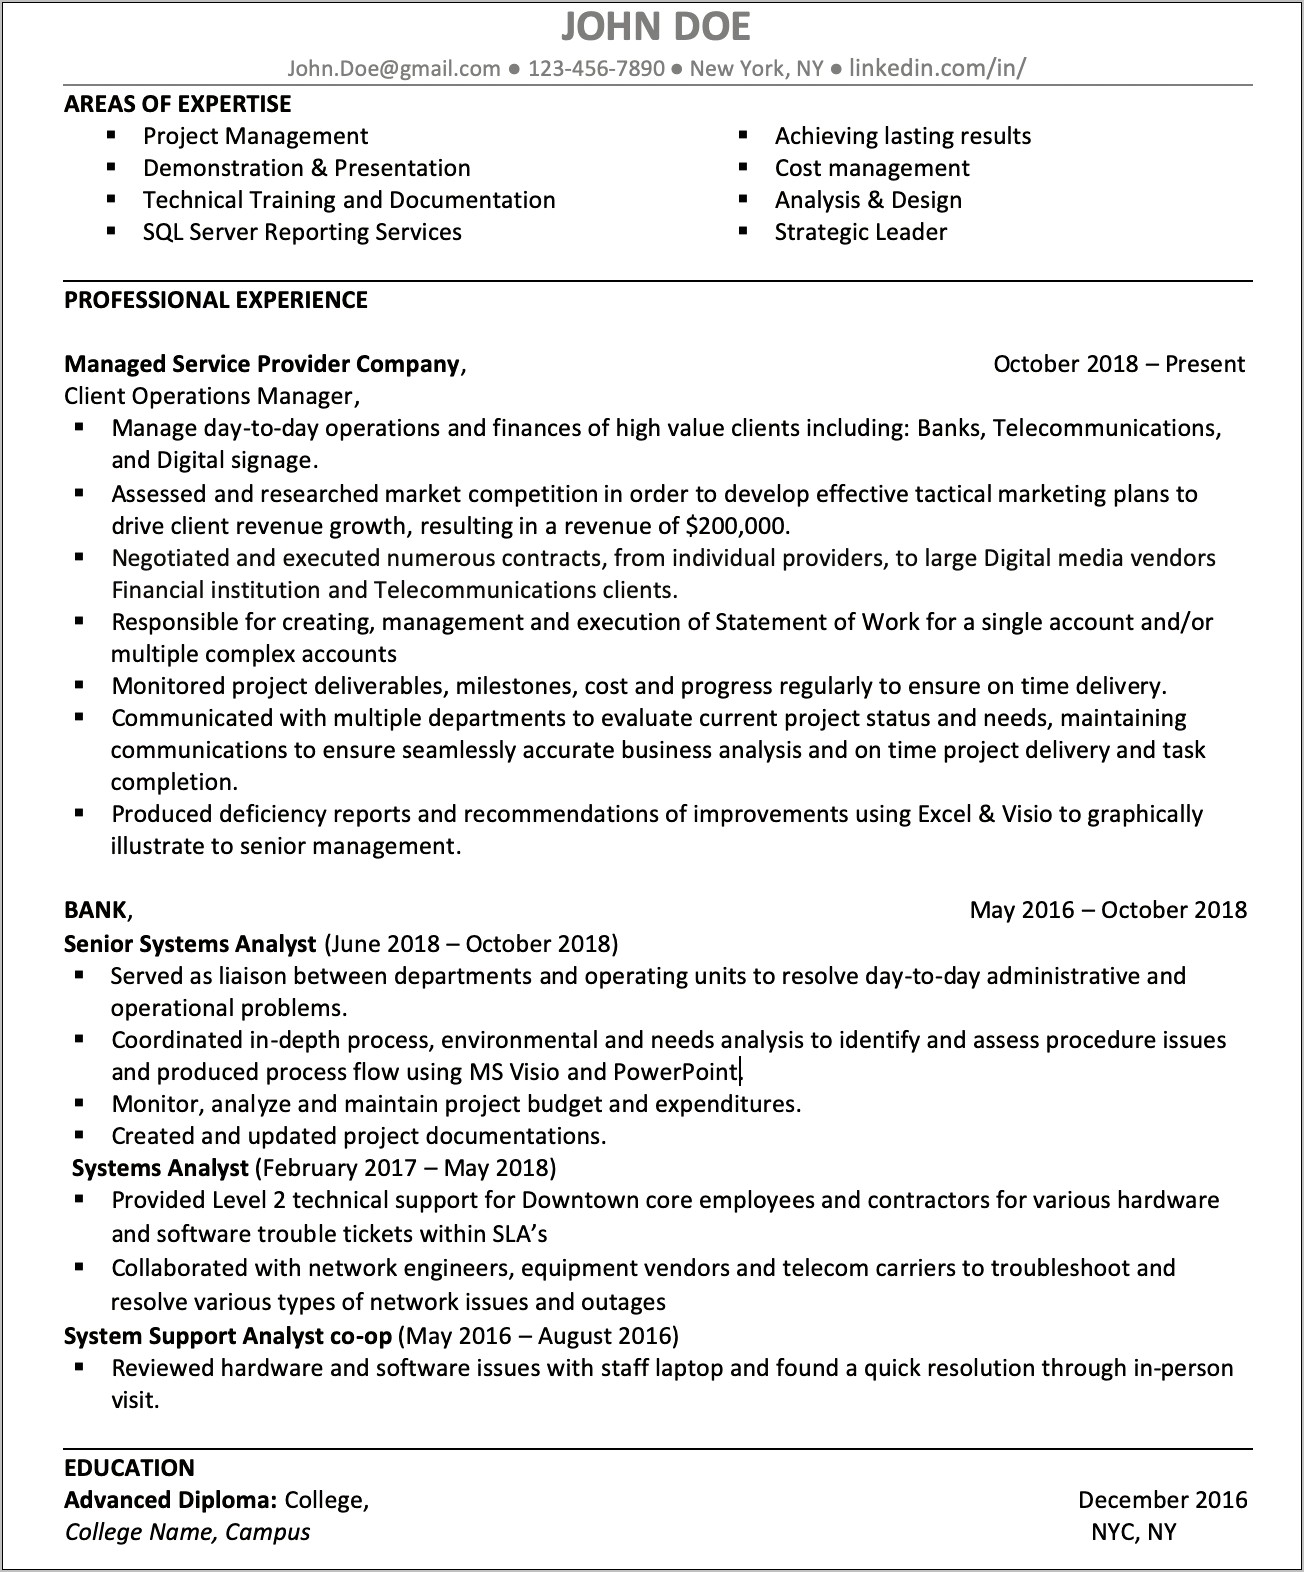 No Interview Resume Required Jobs Near Me